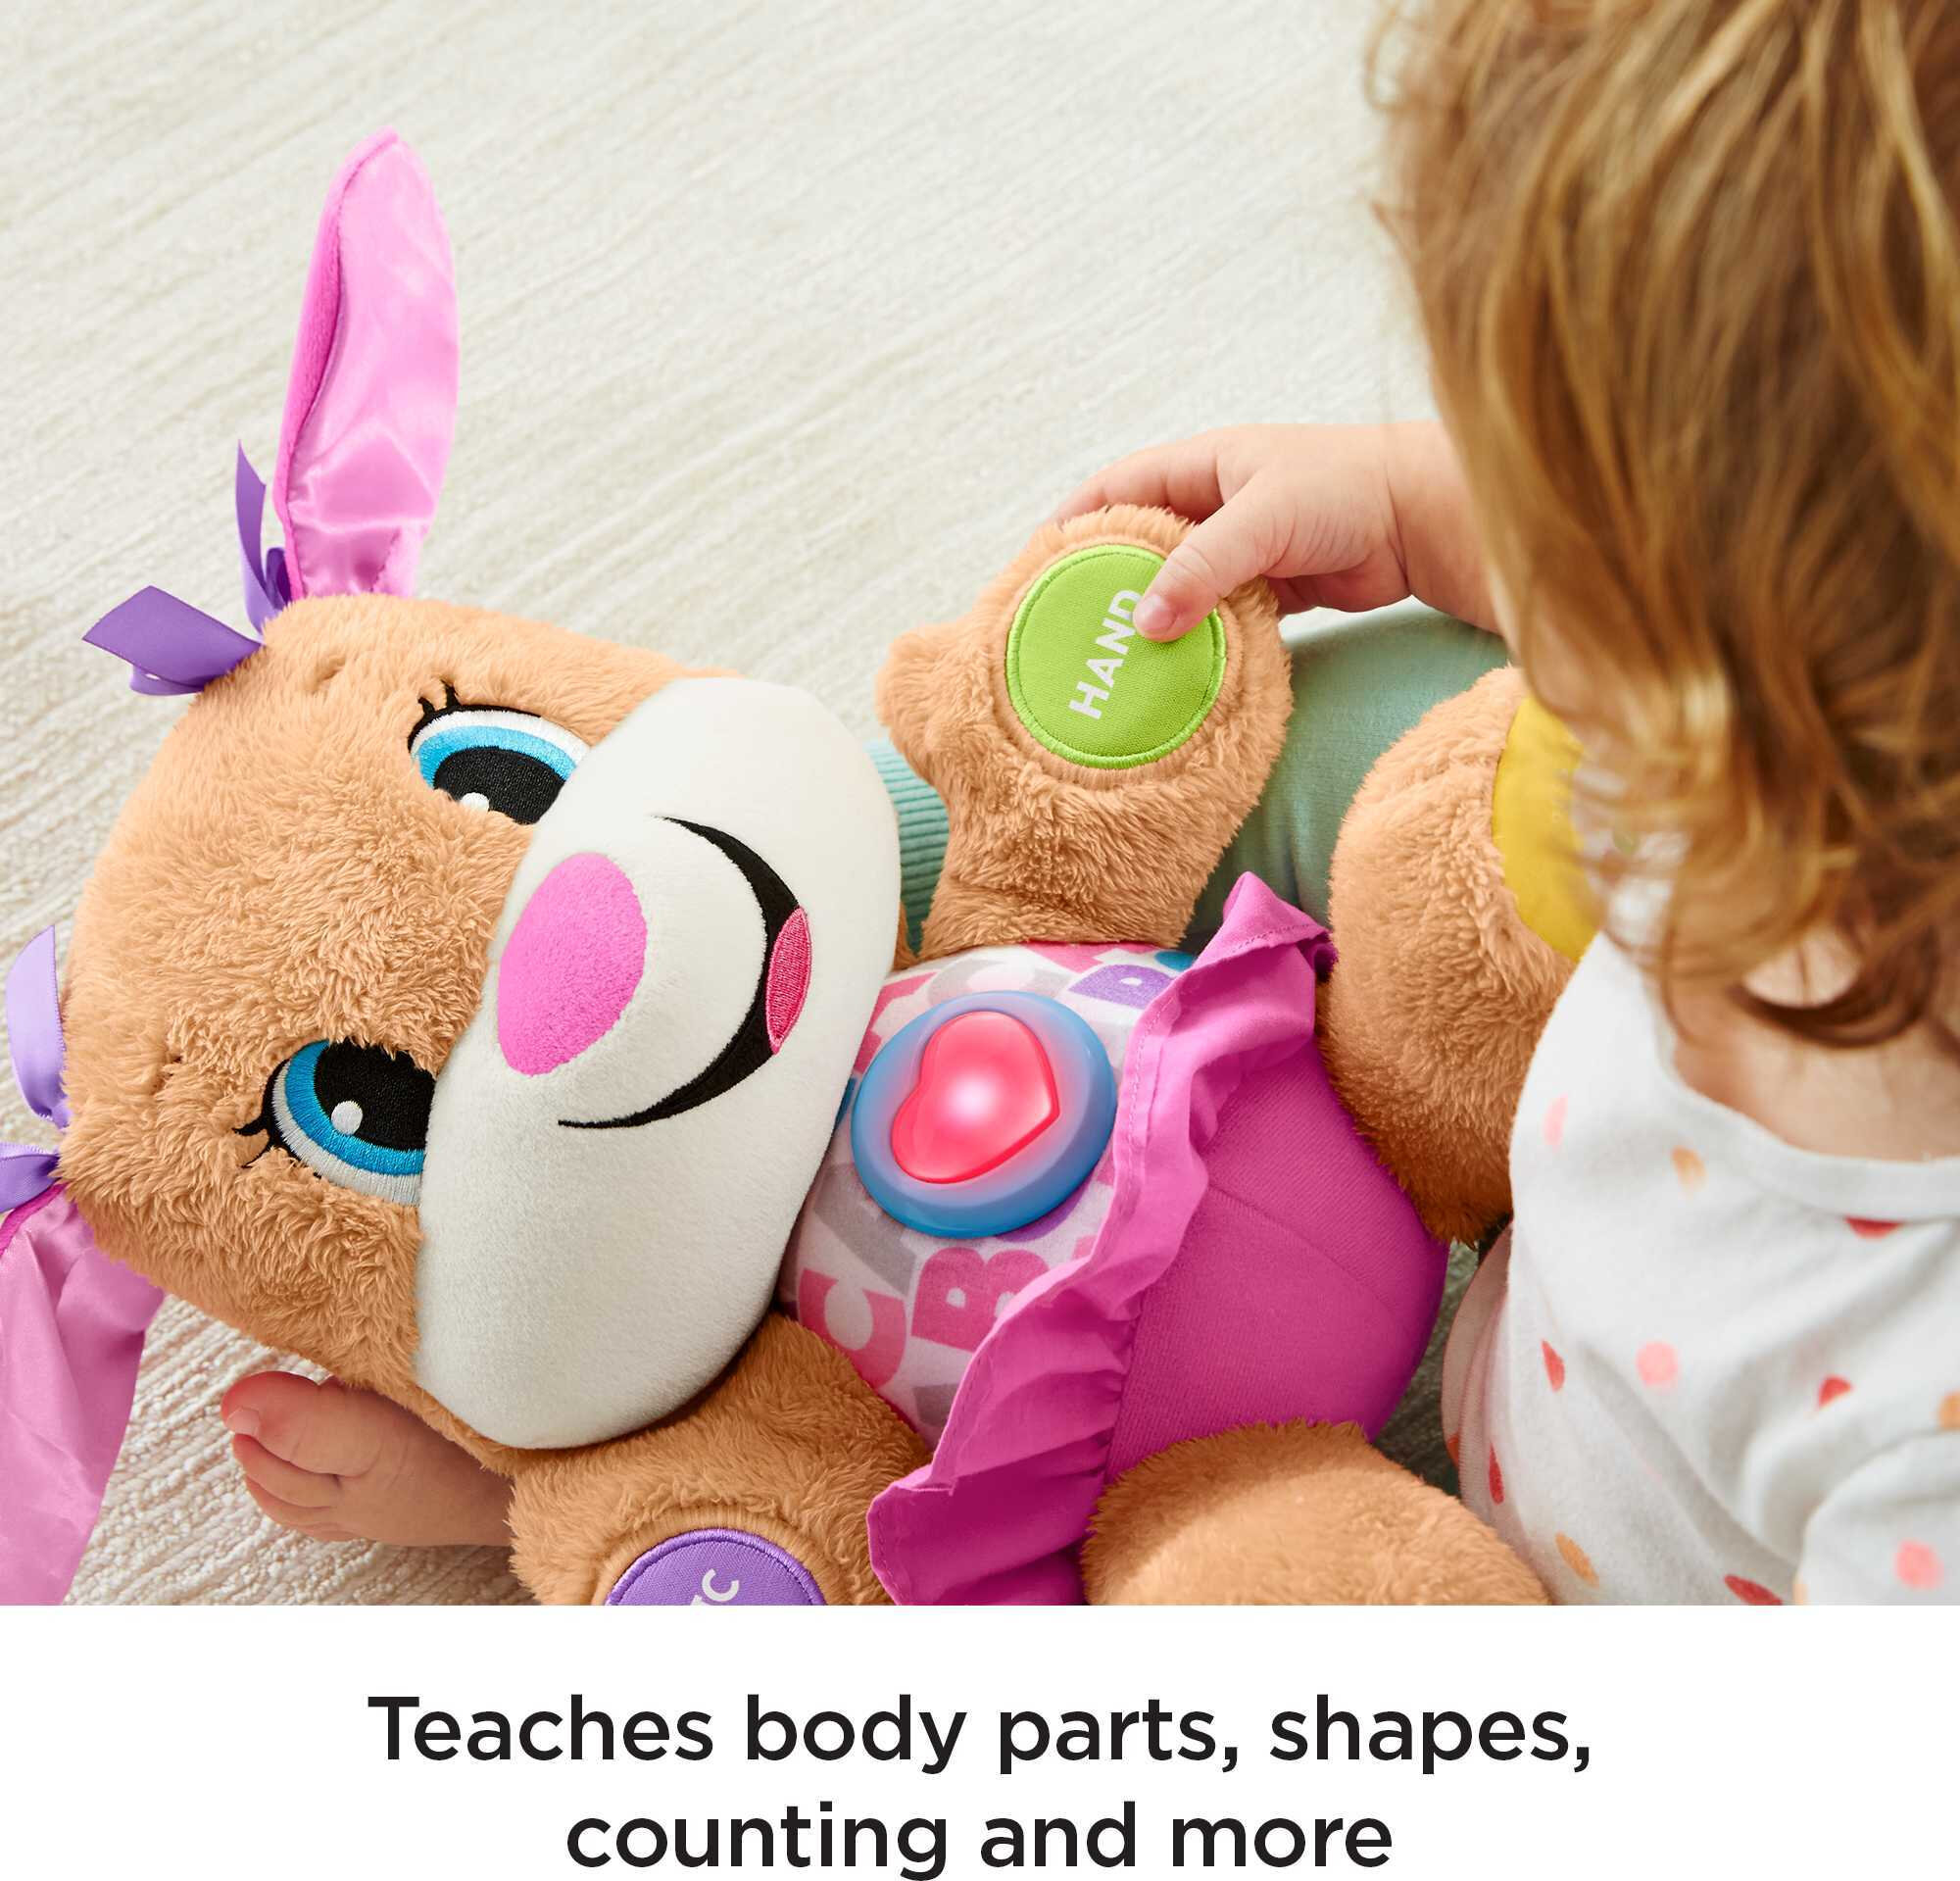 Fisher-Price Laugh & Learn Smart Stages Sis Puppy Plush Learning Toy for Baby, Infants and Toddlers, 6 months and up - image 6 of 8